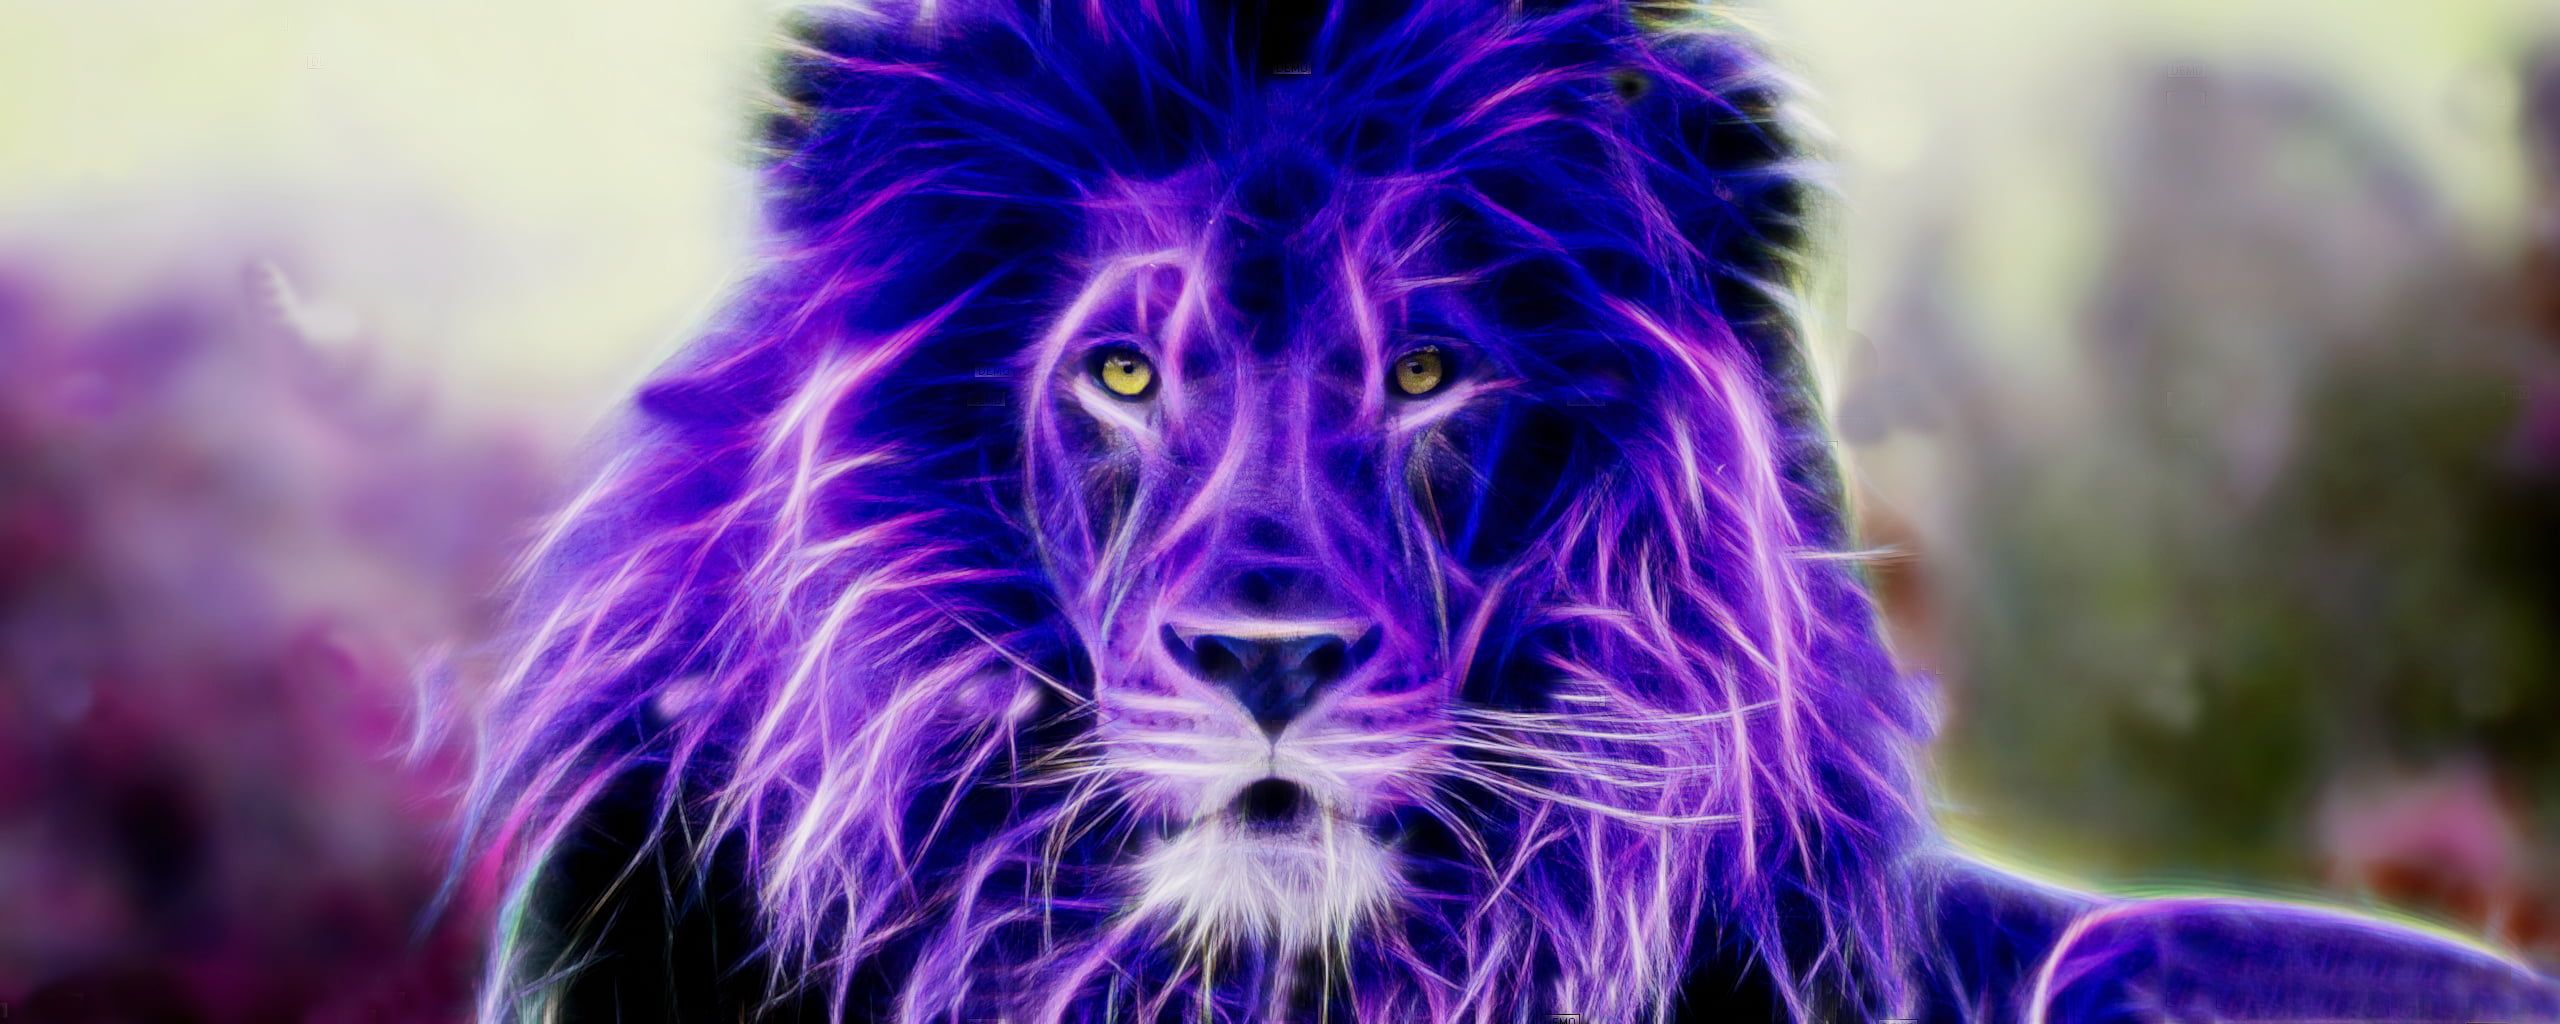 Abstract Wallpaper Purple Lion